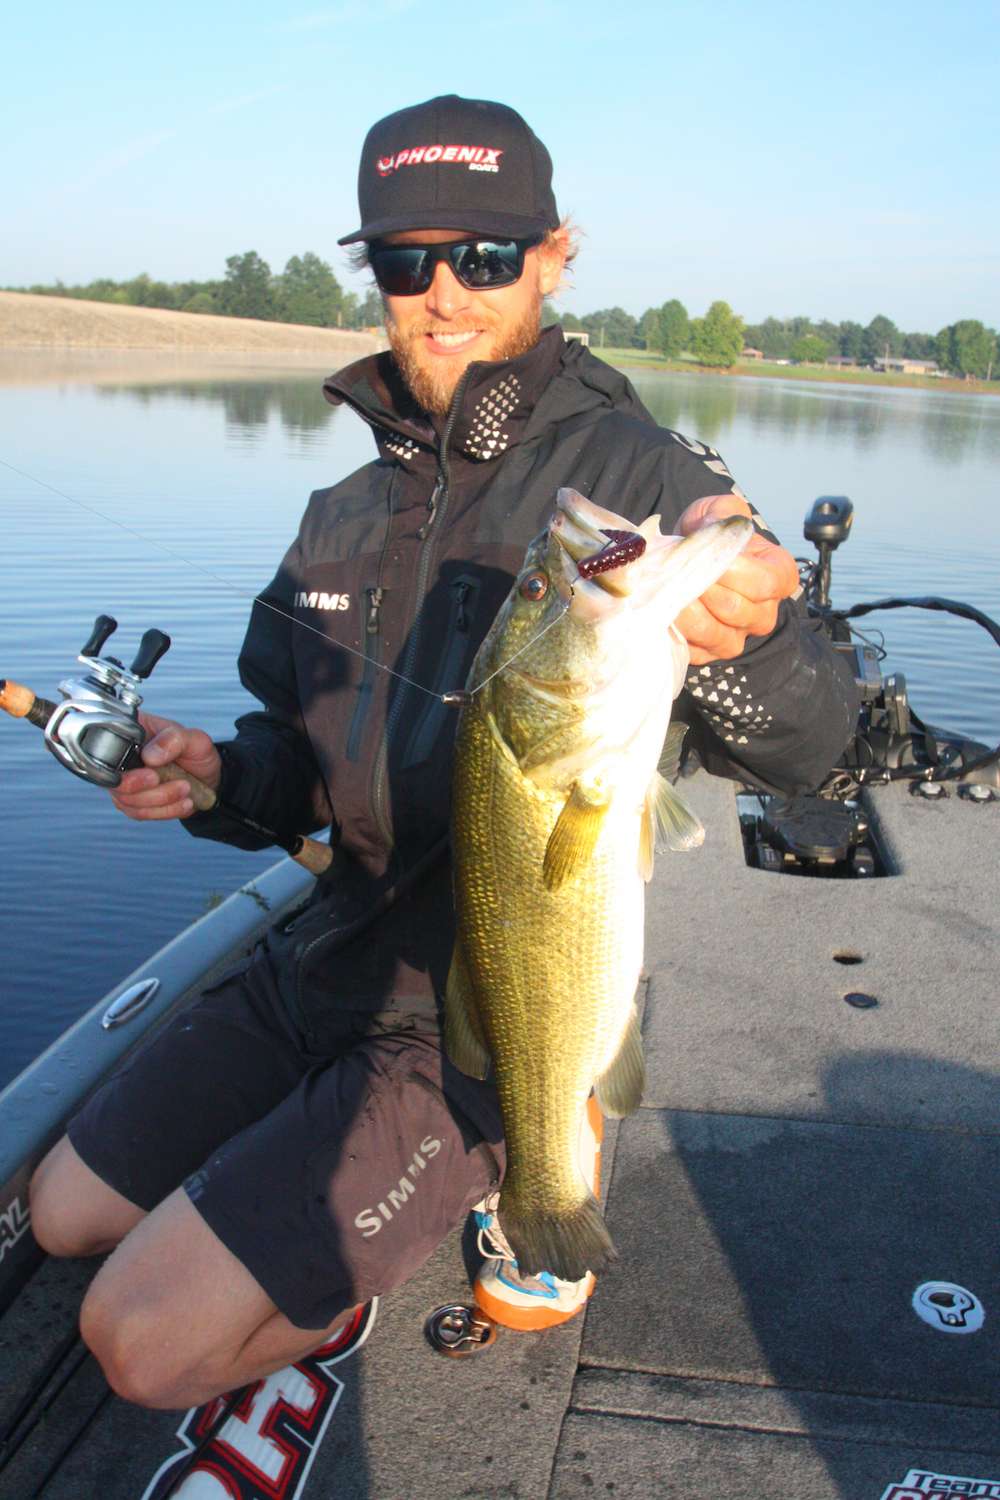 <b>7:40 a.m.</b> He works it to the boat and swings aboard his first keeper of the day, a long, lean largemouth weighing 4 pounds, 8 ounces. âThat fish was right at the edge of the grass.â<br>
<b>7:48 a.m.</b> Elam continues down the dam while casting the worm parallel to the structure. <br>
<b>7:55 a.m.</b> Elam idles back toward the boat ramp to drag a Chunk Craw along a deep channel point heâd graphed up after launching. <br>
<b>7:58 a.m.</b> He catches keeper No. 2, 15 ounces, on the craw. âThat fish was on a little flat that butts up to the point. It was 15 feet deep.â
<p>
<b>6 HOURS LEFT</b><br>
<b>8:01 a.m.</b> Elam switches to a chartreuse sexy shad Strike King 5XD crankbait and dredges it across the point. <br>
<b>8:08 a.m.</b> He moves to the opposite side of the point and drags the Power Worm. âThereâs grass growing down there to around 12 feet.â <br>
<b>8:15 a.m.</b> Elam tries a homemade 3/8-ounce green pumpkin/blue cone-head jig with a watermelon pepper Chunk Craw trailer on the point. âMy dad makes these jigs specifically for fishing grass. Weâve both caught some whales on âem.â
